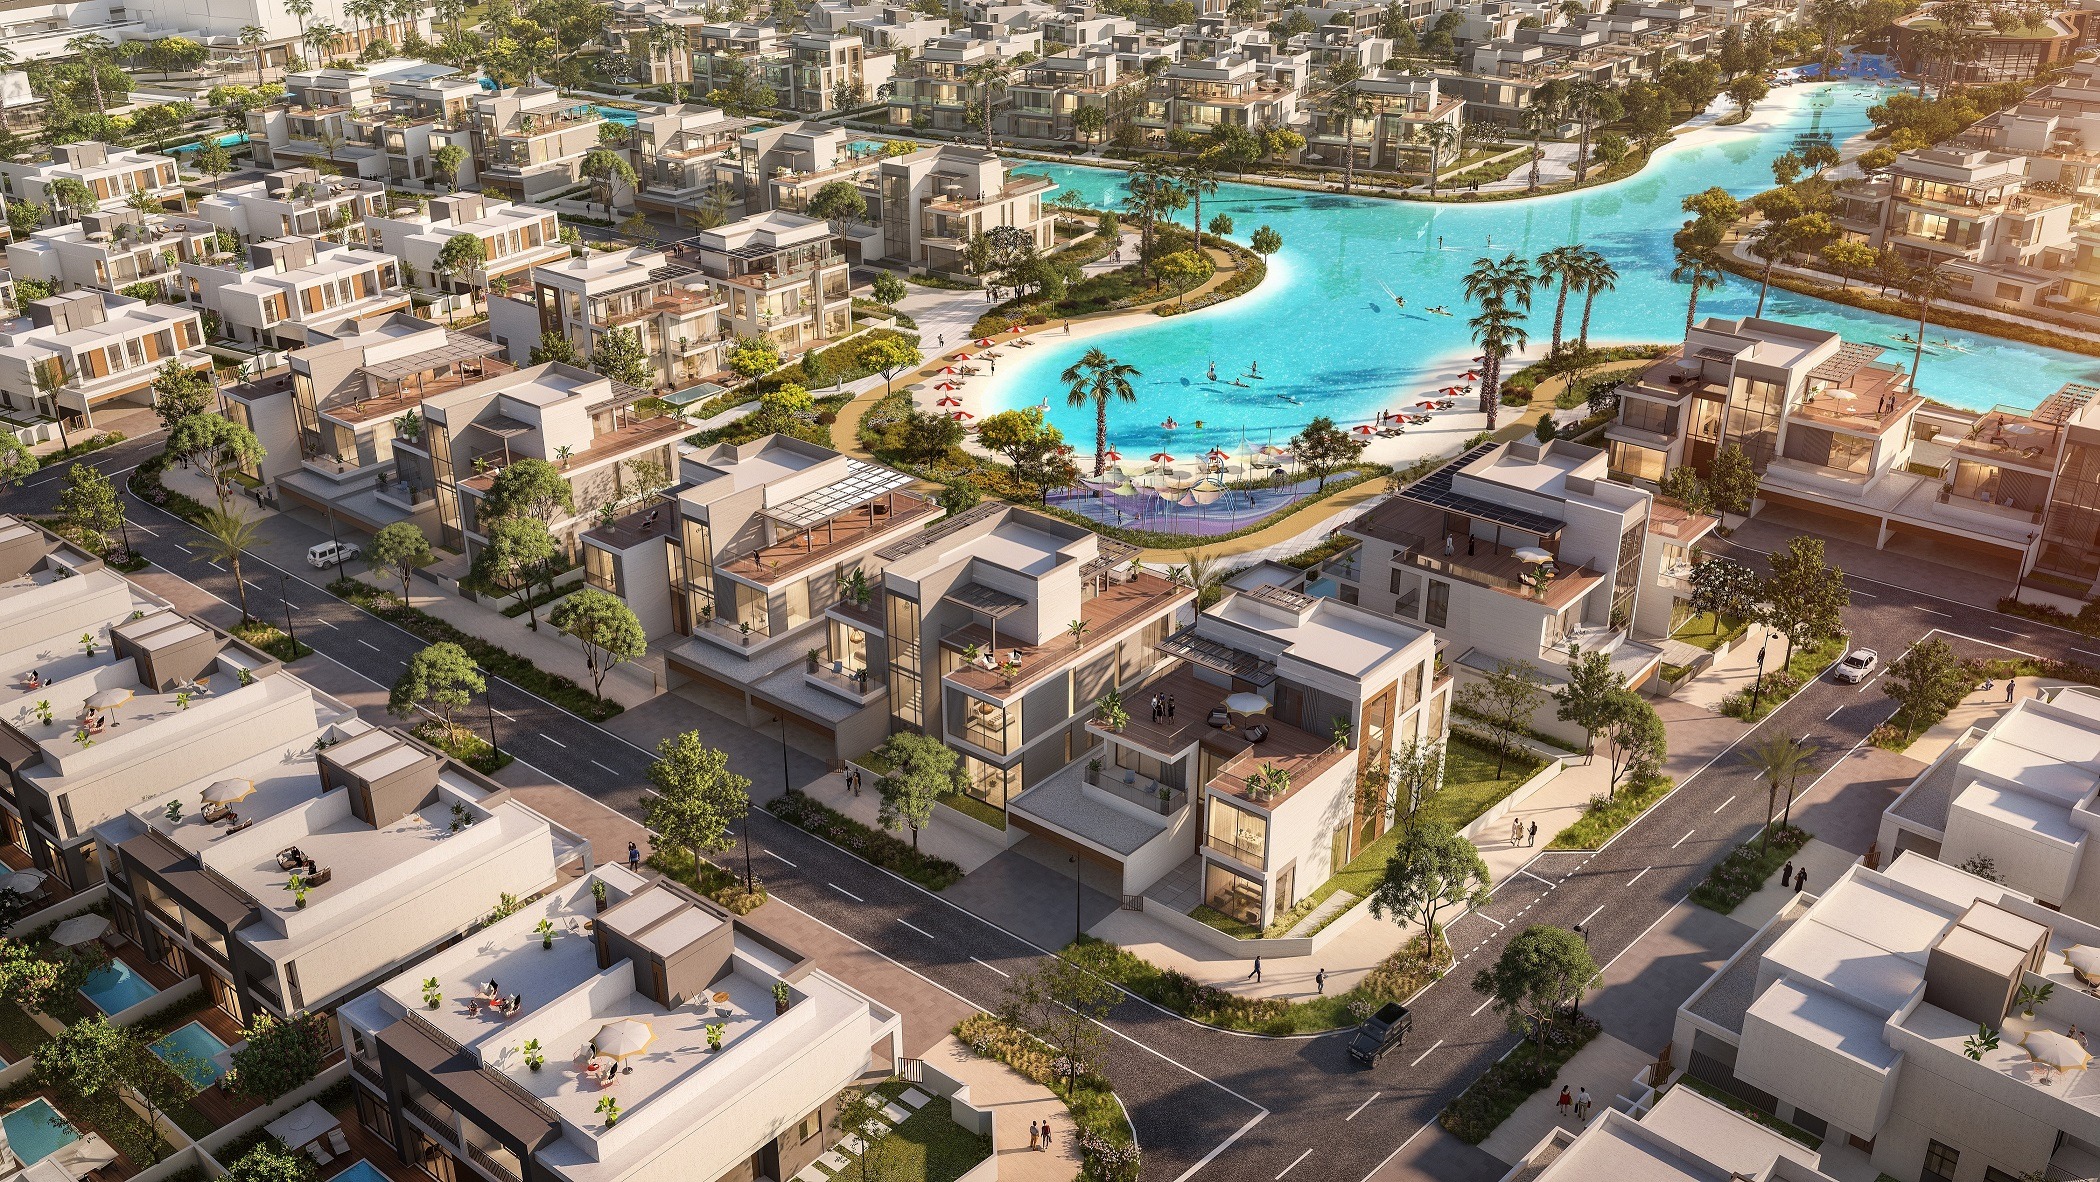 Dubai South Properties announced the commencement of construction works for the first two phases of its South Bay project.